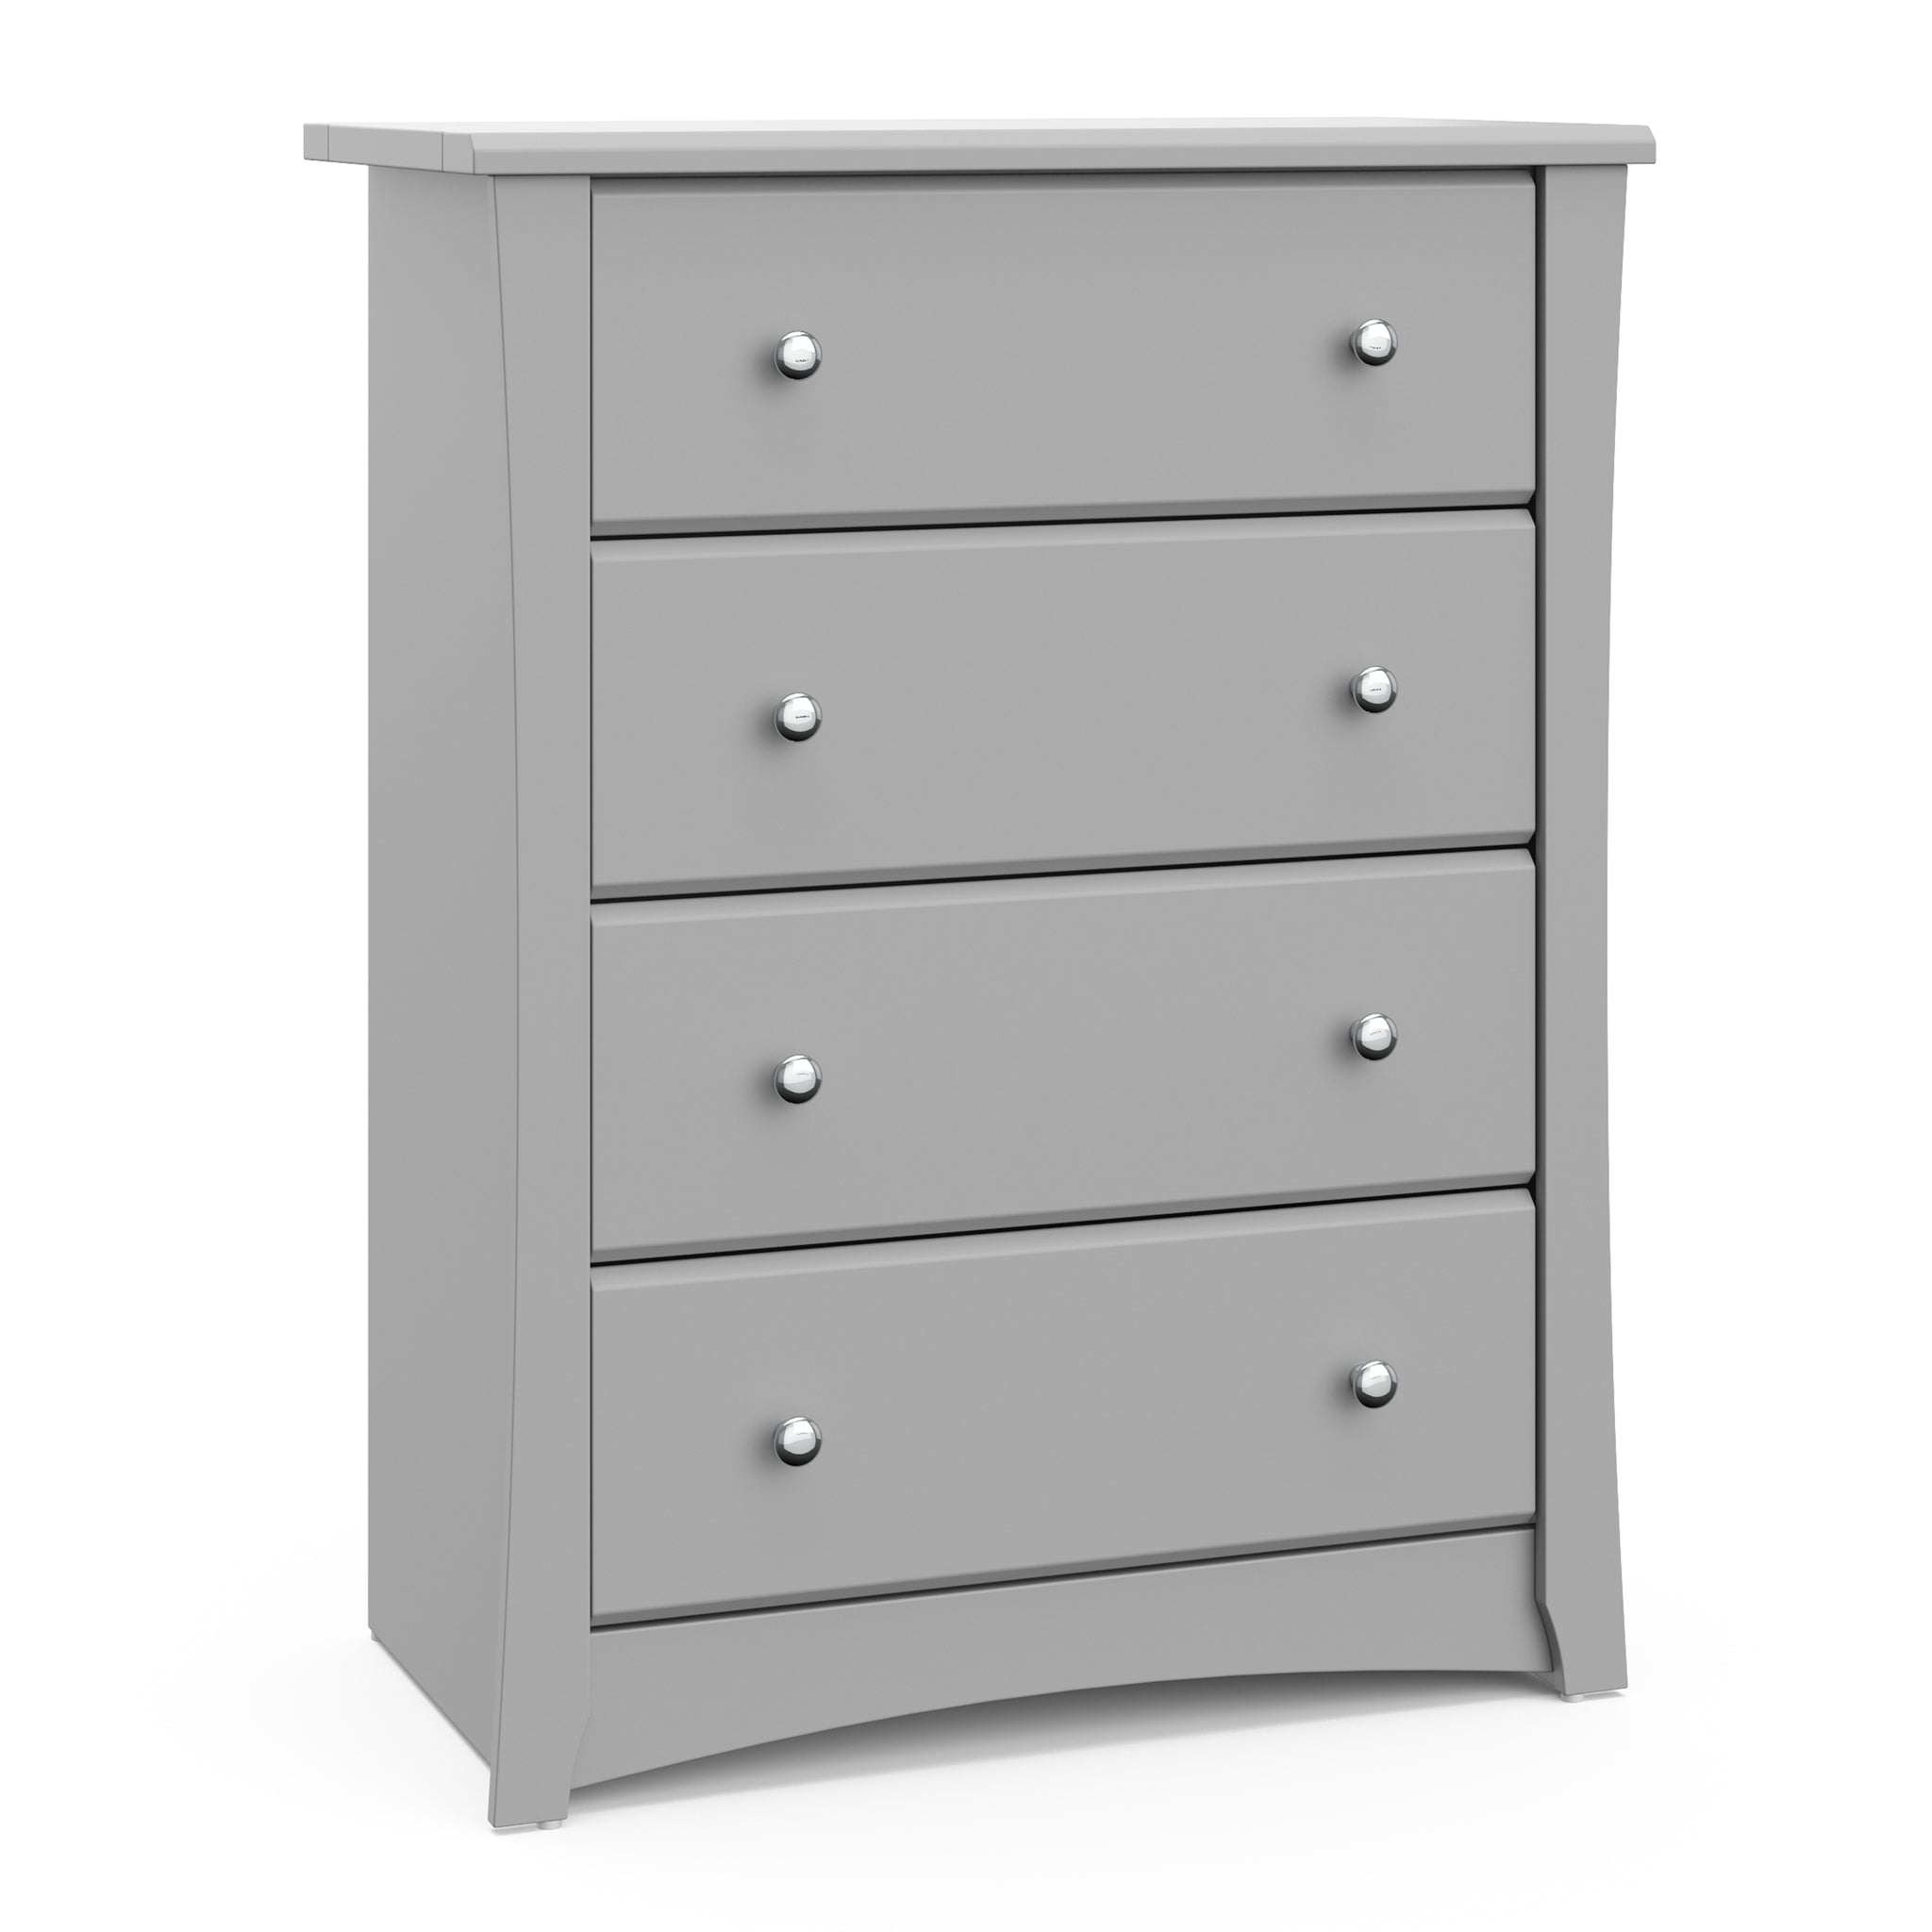 Pebble gray 4 drawer chest angled